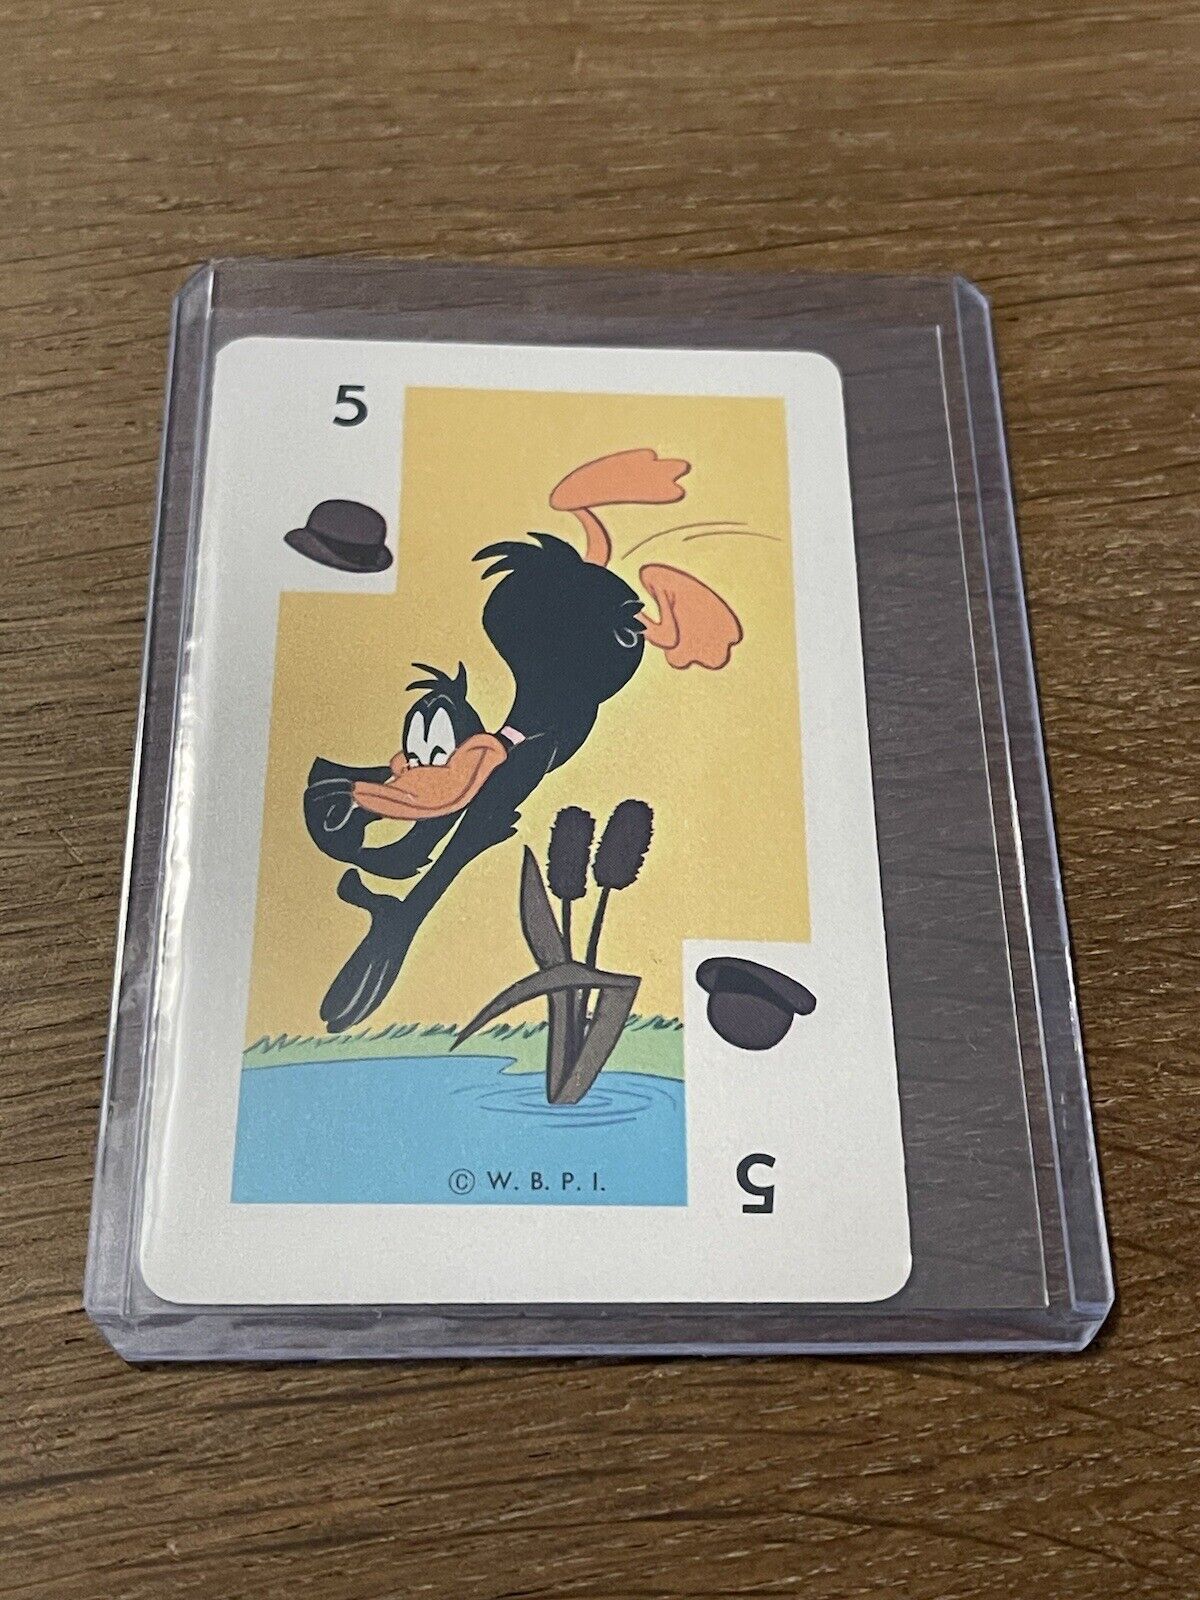 1966 WARNER BROS. PICTURES WHITMAN BUGS BUNNY DAFFY DUCK CARD GAME PLAYING CARD